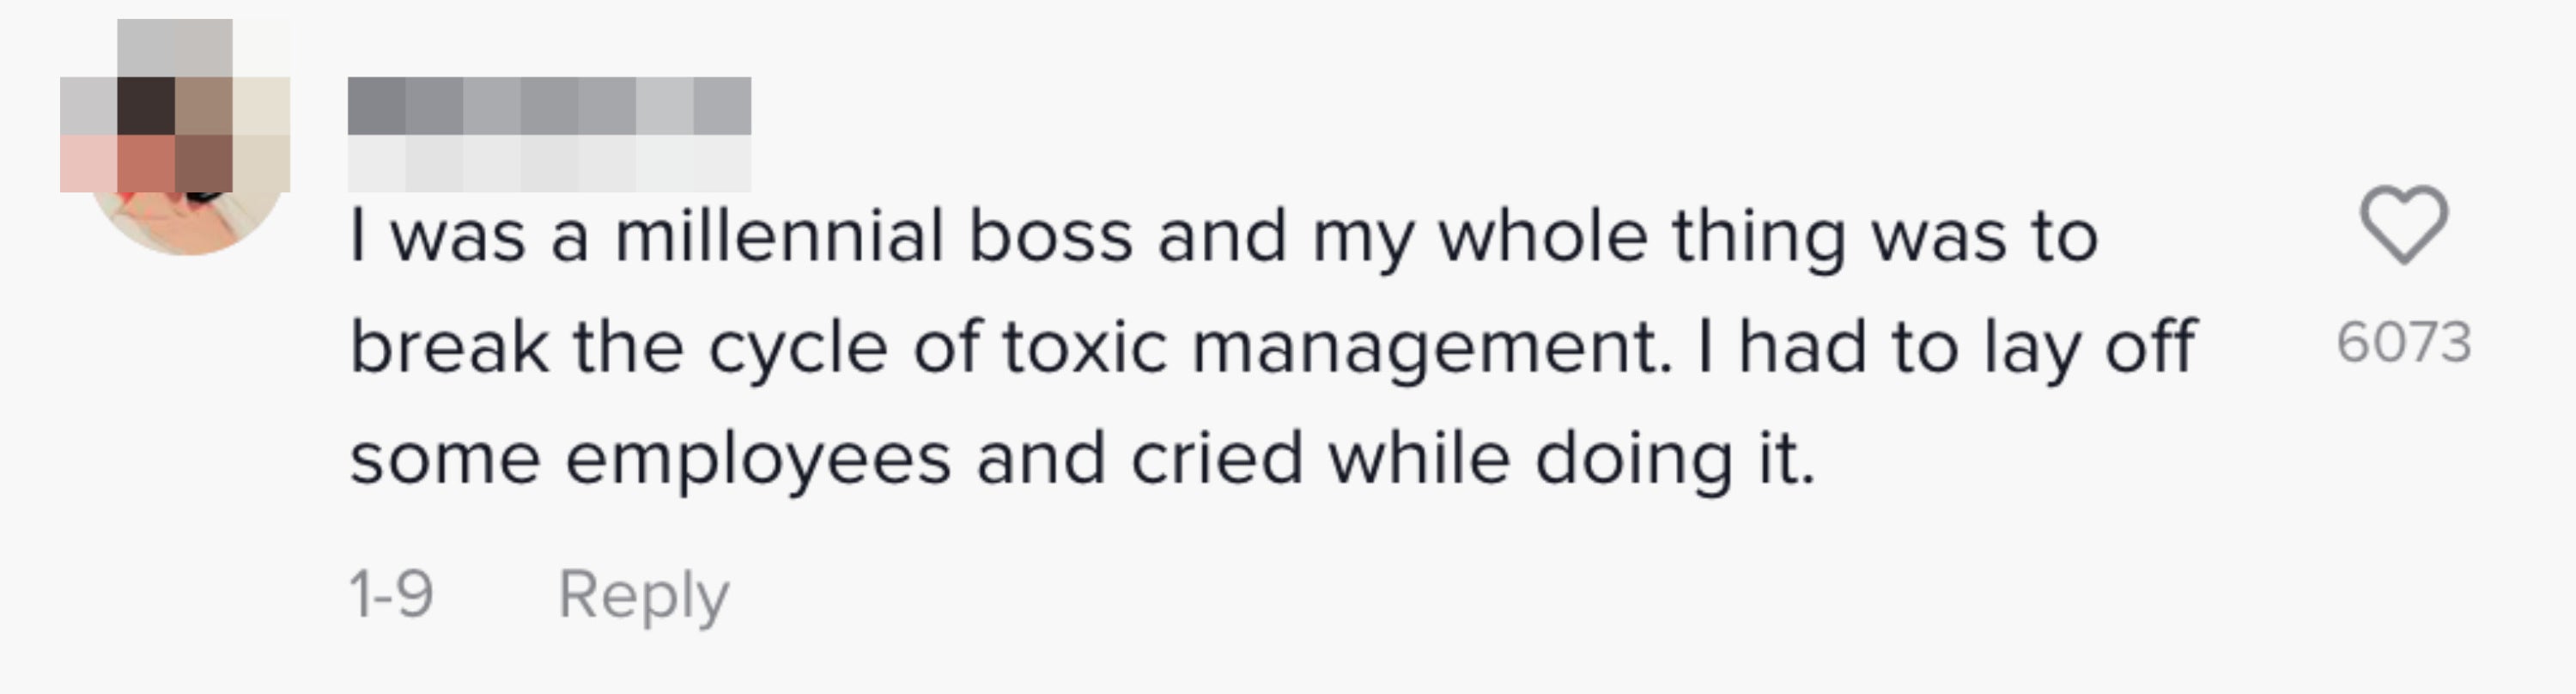 &quot;I was a millennial boss and my whole thing was to break the cycle of toxic management. I had to lay off some employees and cried while doing it&quot;